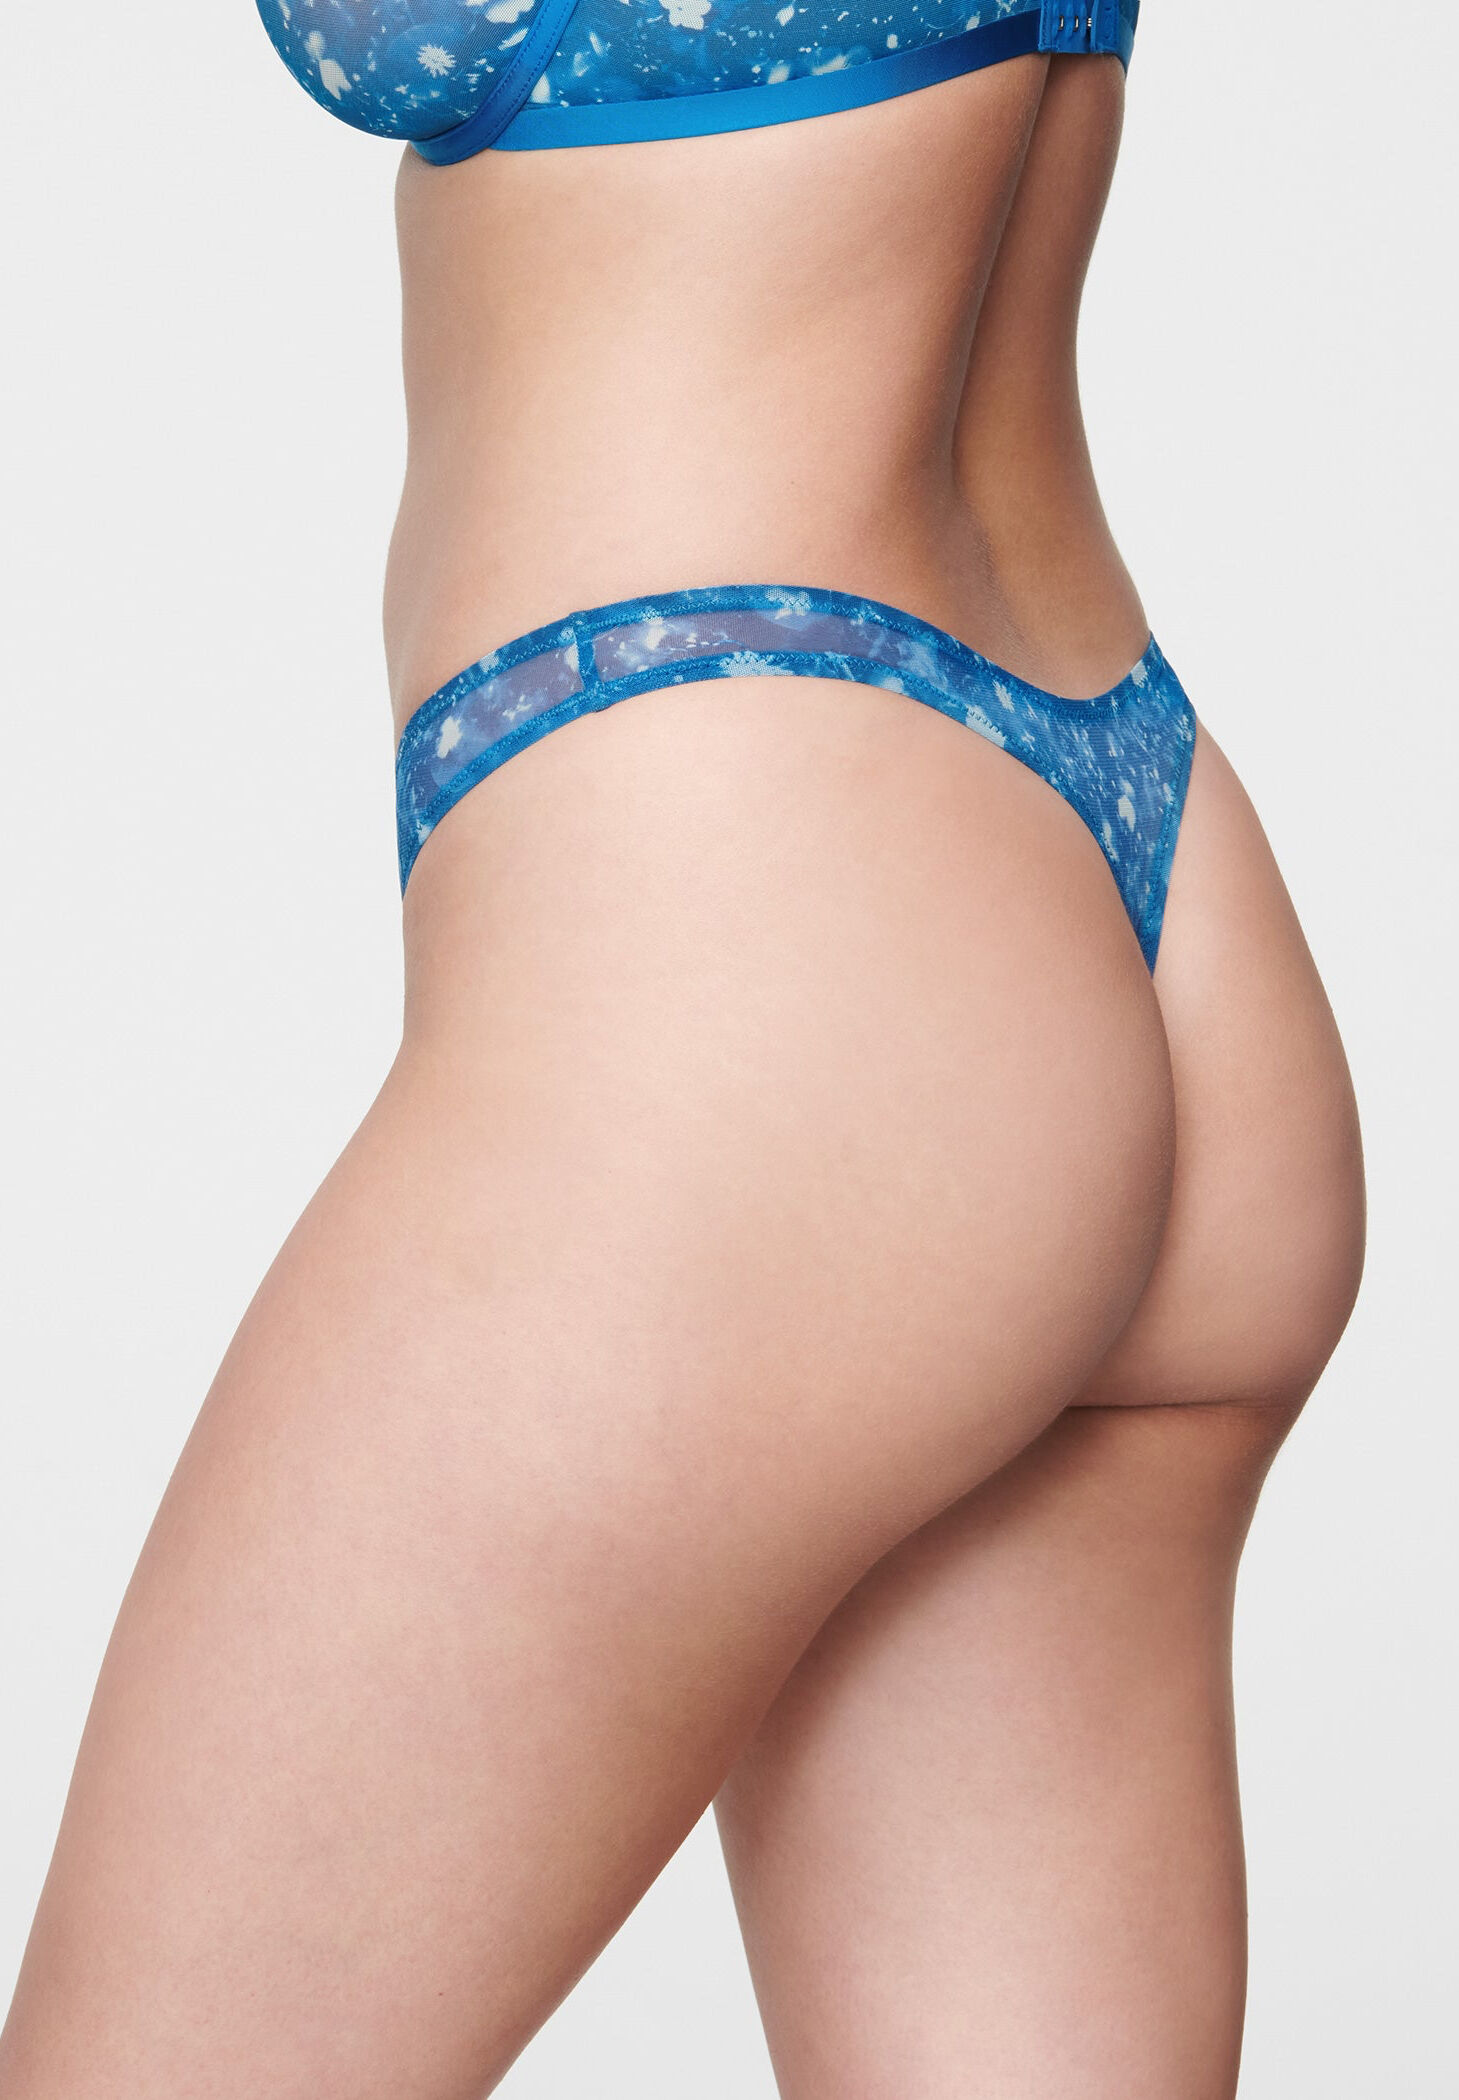 Floral Mesh Silk Thong Panty [FST01] - $32.99 : FreedomSilk, Best